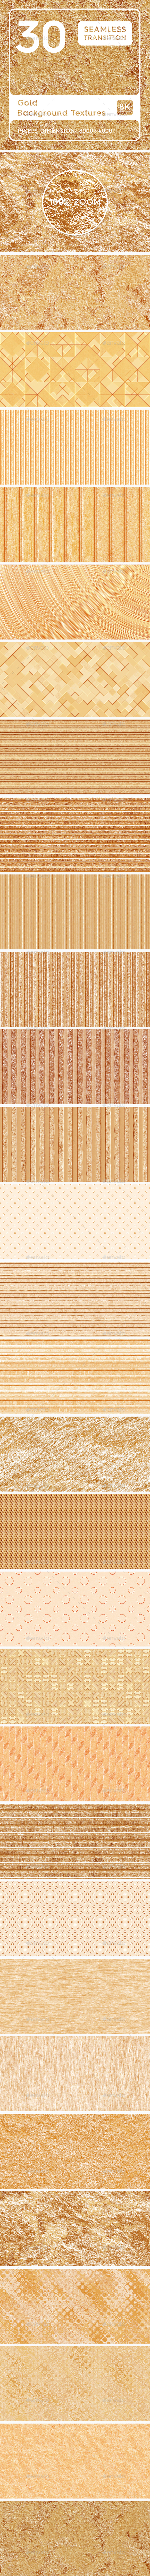 30 Gold Background Textures. Seamless Transition.